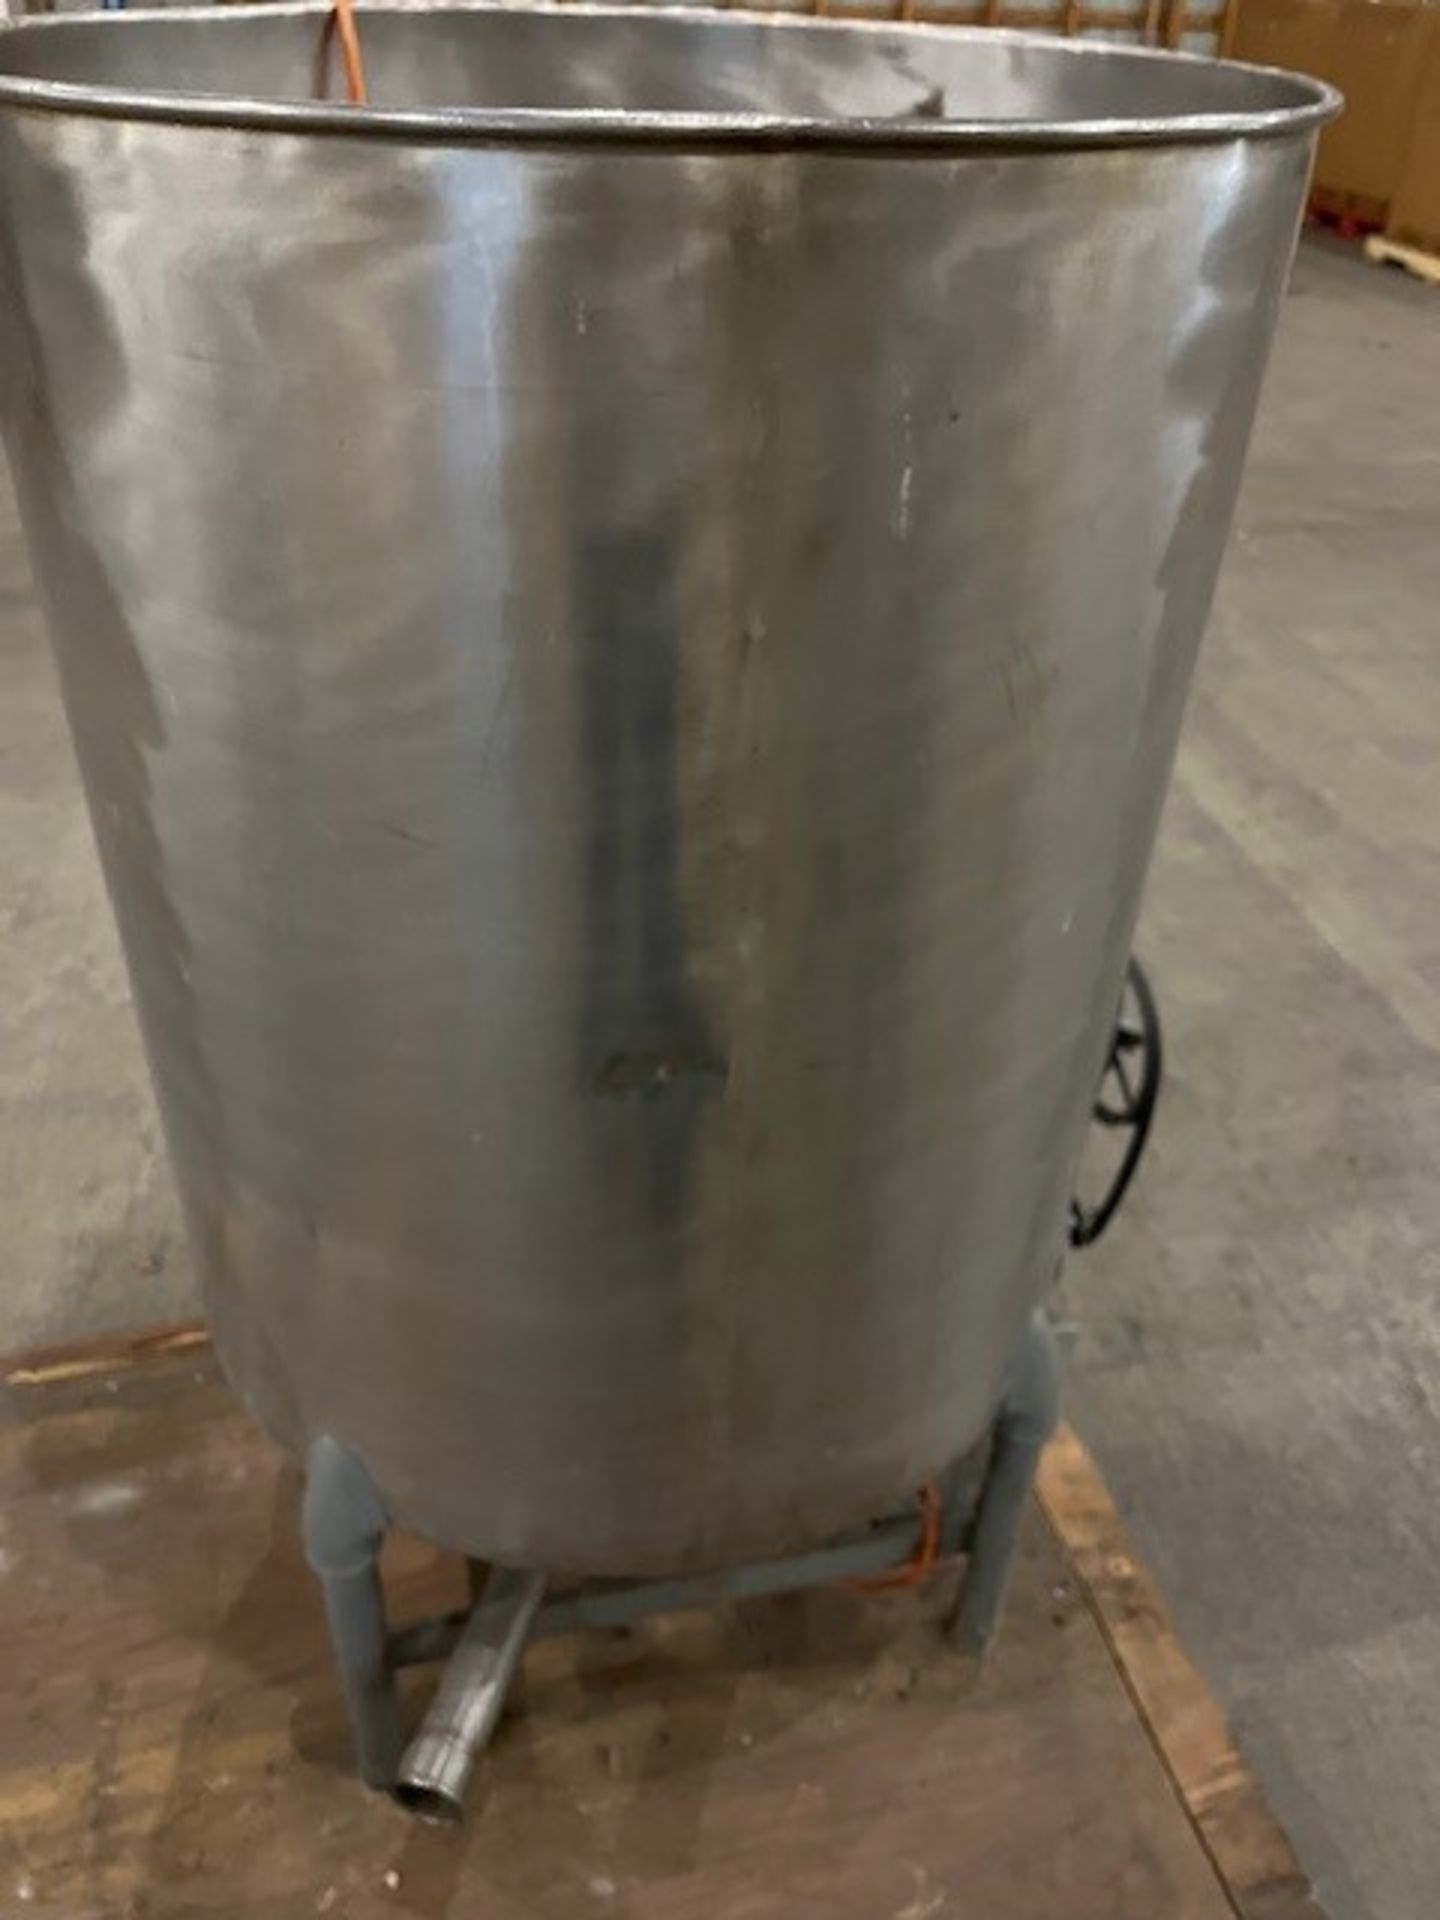 Consignment Item - located in Breese IL: Small mixing tank with motor - Image 2 of 3